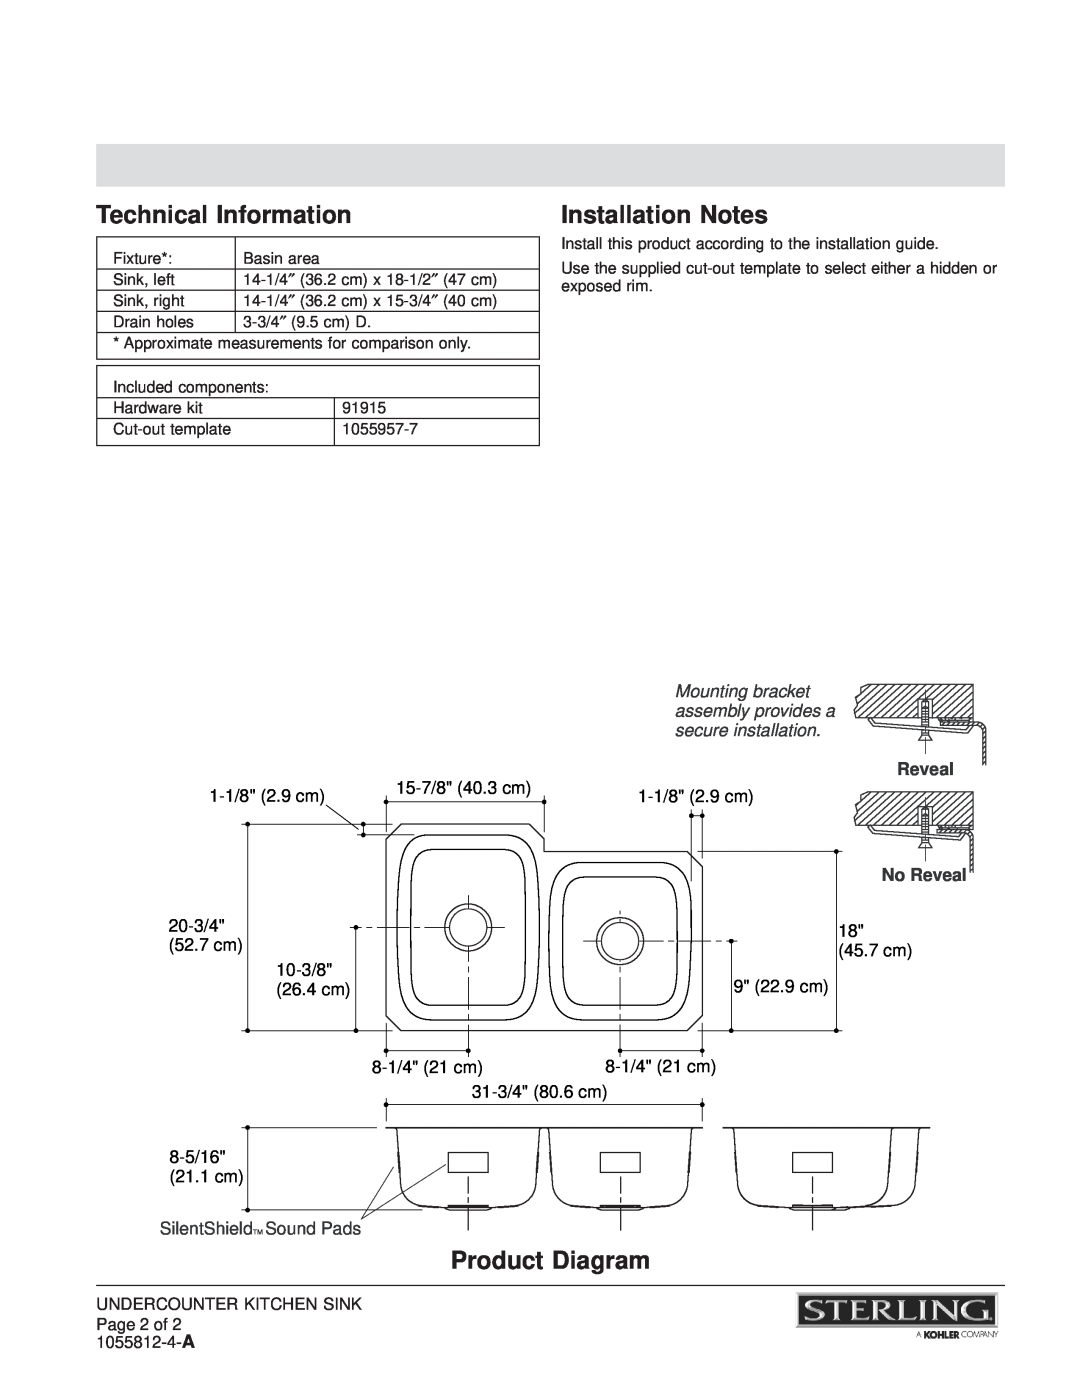 Sterling Plumbing 11409 Technical Information, Installation Notes, Product Diagram, Reveal No Reveal 